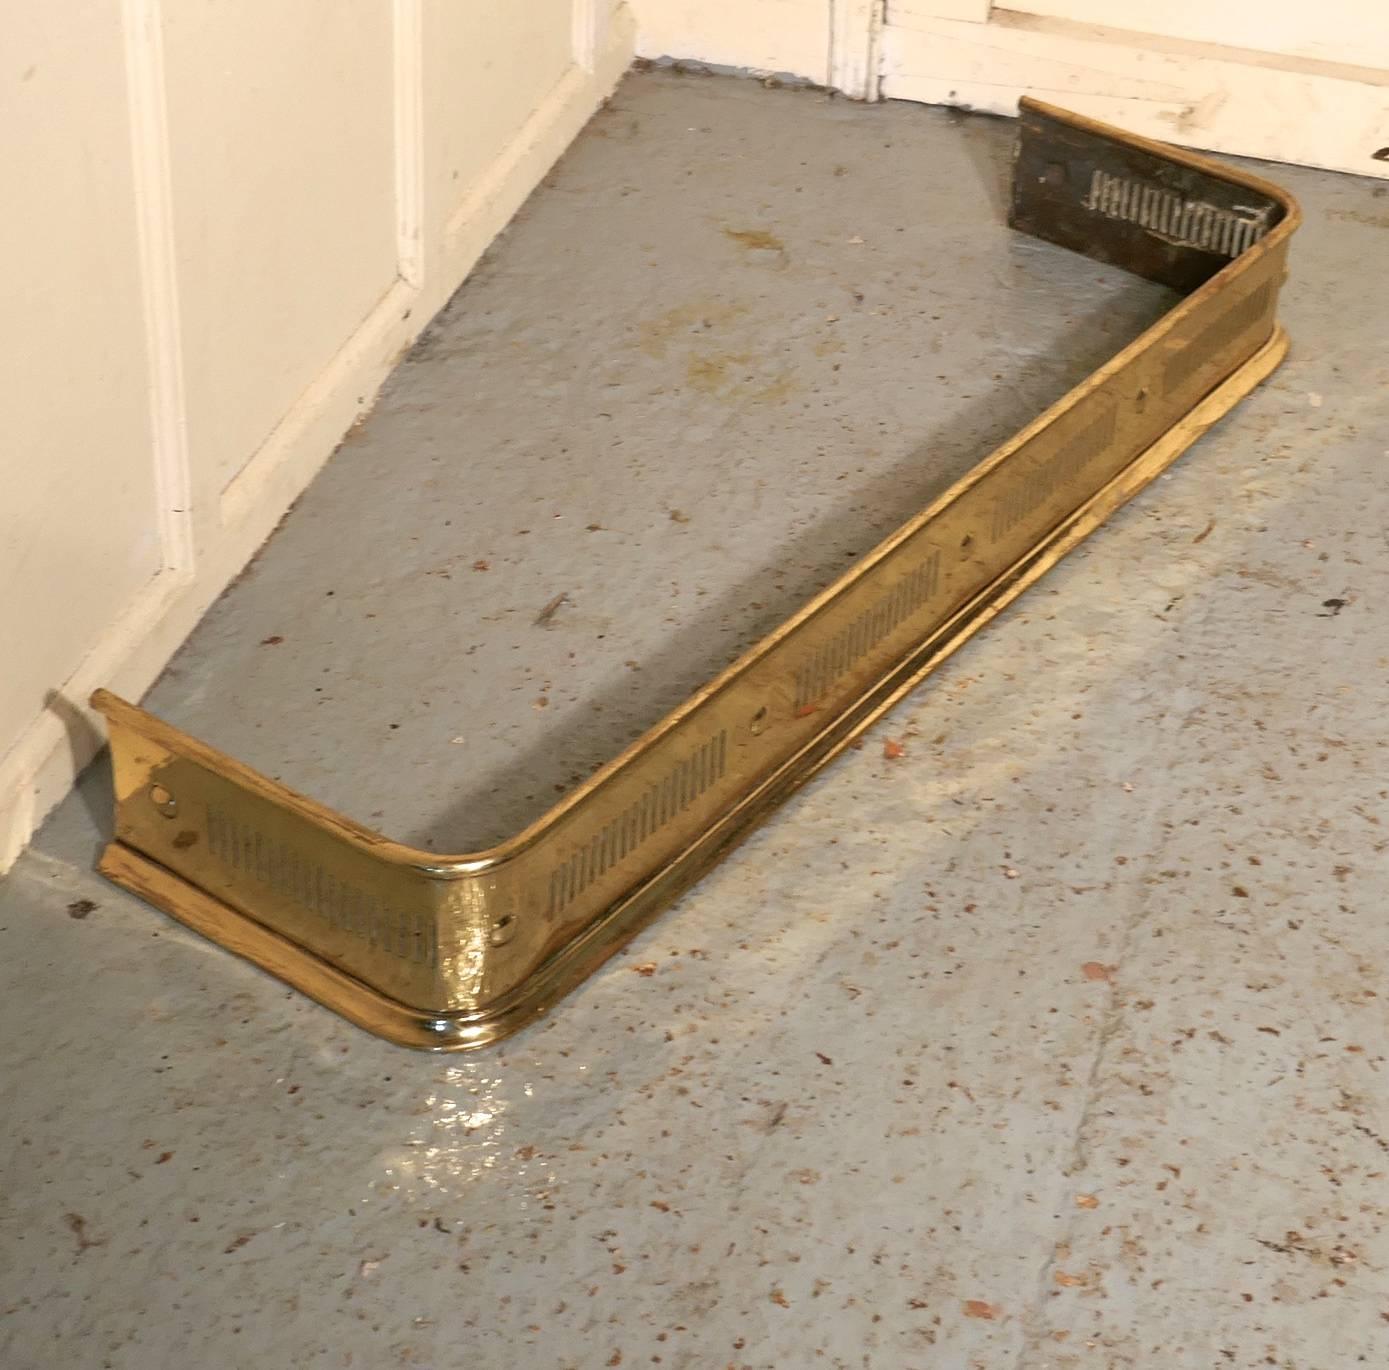 Long Victorian pierced brass fender 

This is a very superior quality Victorian pierced brass fender it has delicate piercing along the front and sides with a flat base for stability
 
The fender is in very good condition, it is 6” high, and 43”